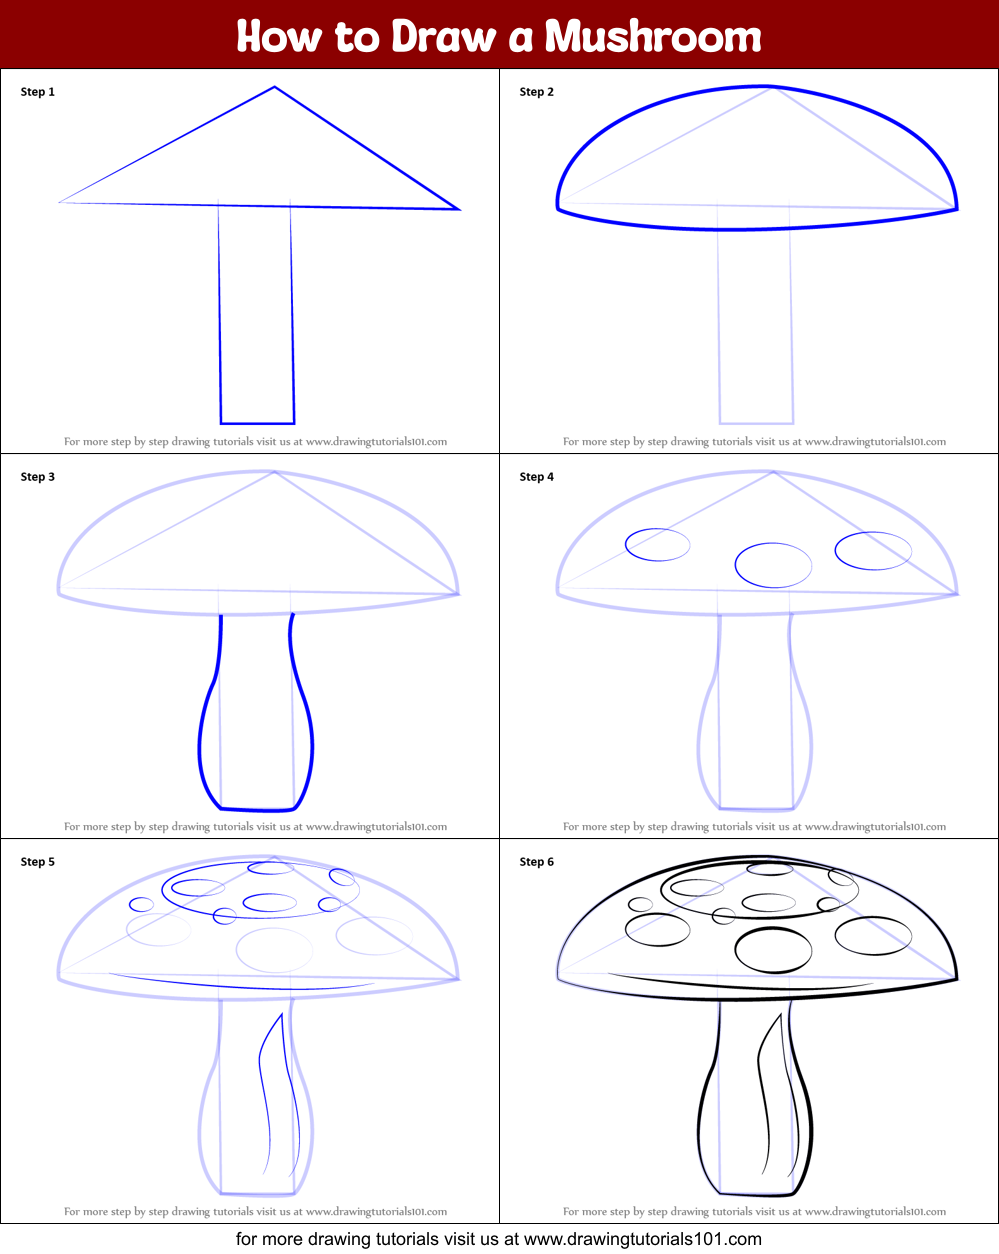 How to Draw a Mushroom printable step by step drawing sheet